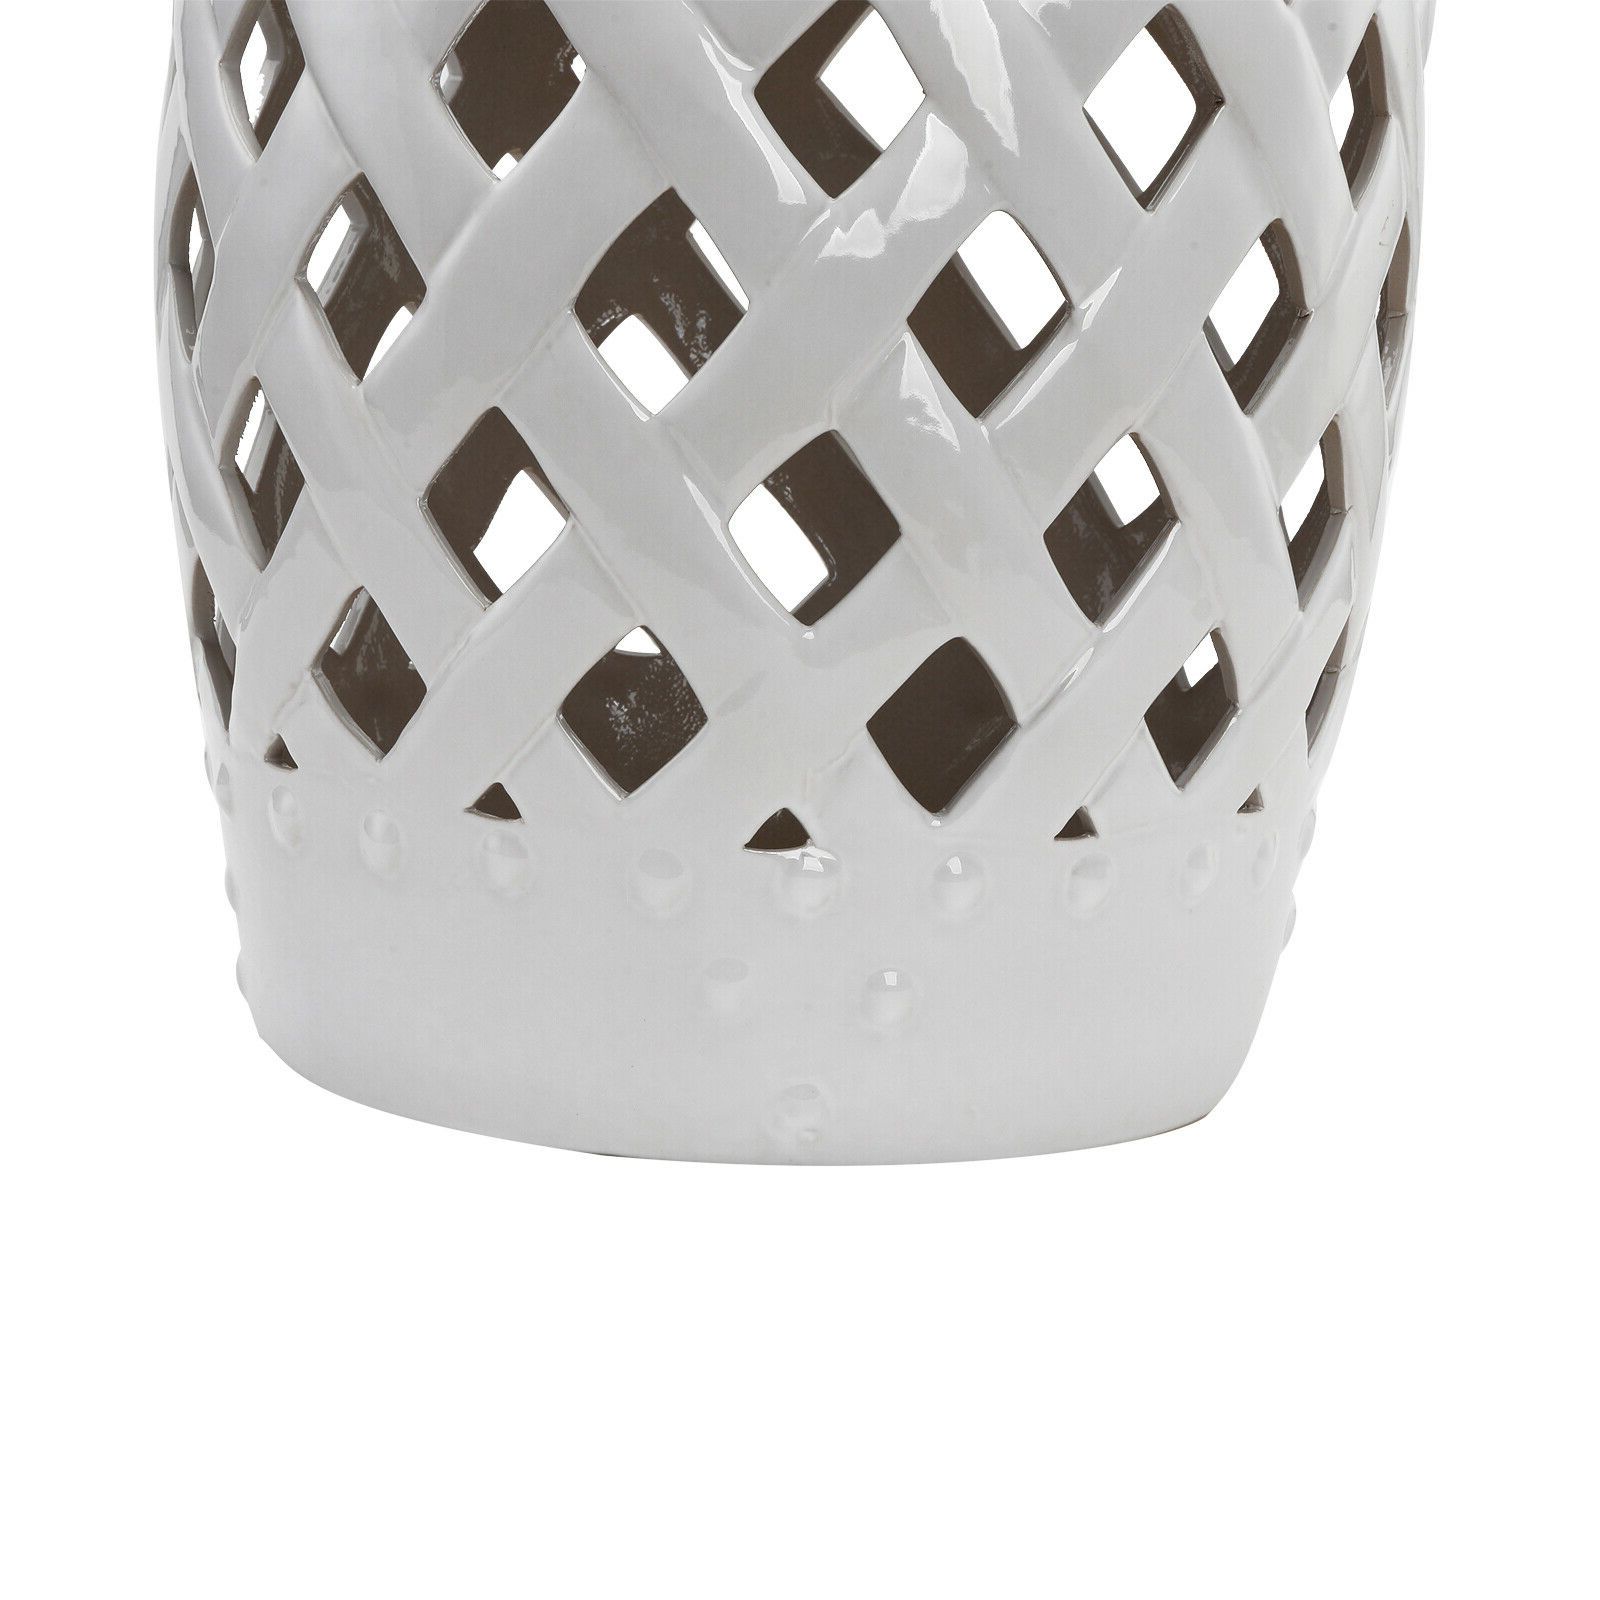 Most Recently Released Standwood Metal Garden Stools Throughout Outsunny Modern Ceramic Lattice Garden Stool Accent Table Decorative White (View 24 of 30)